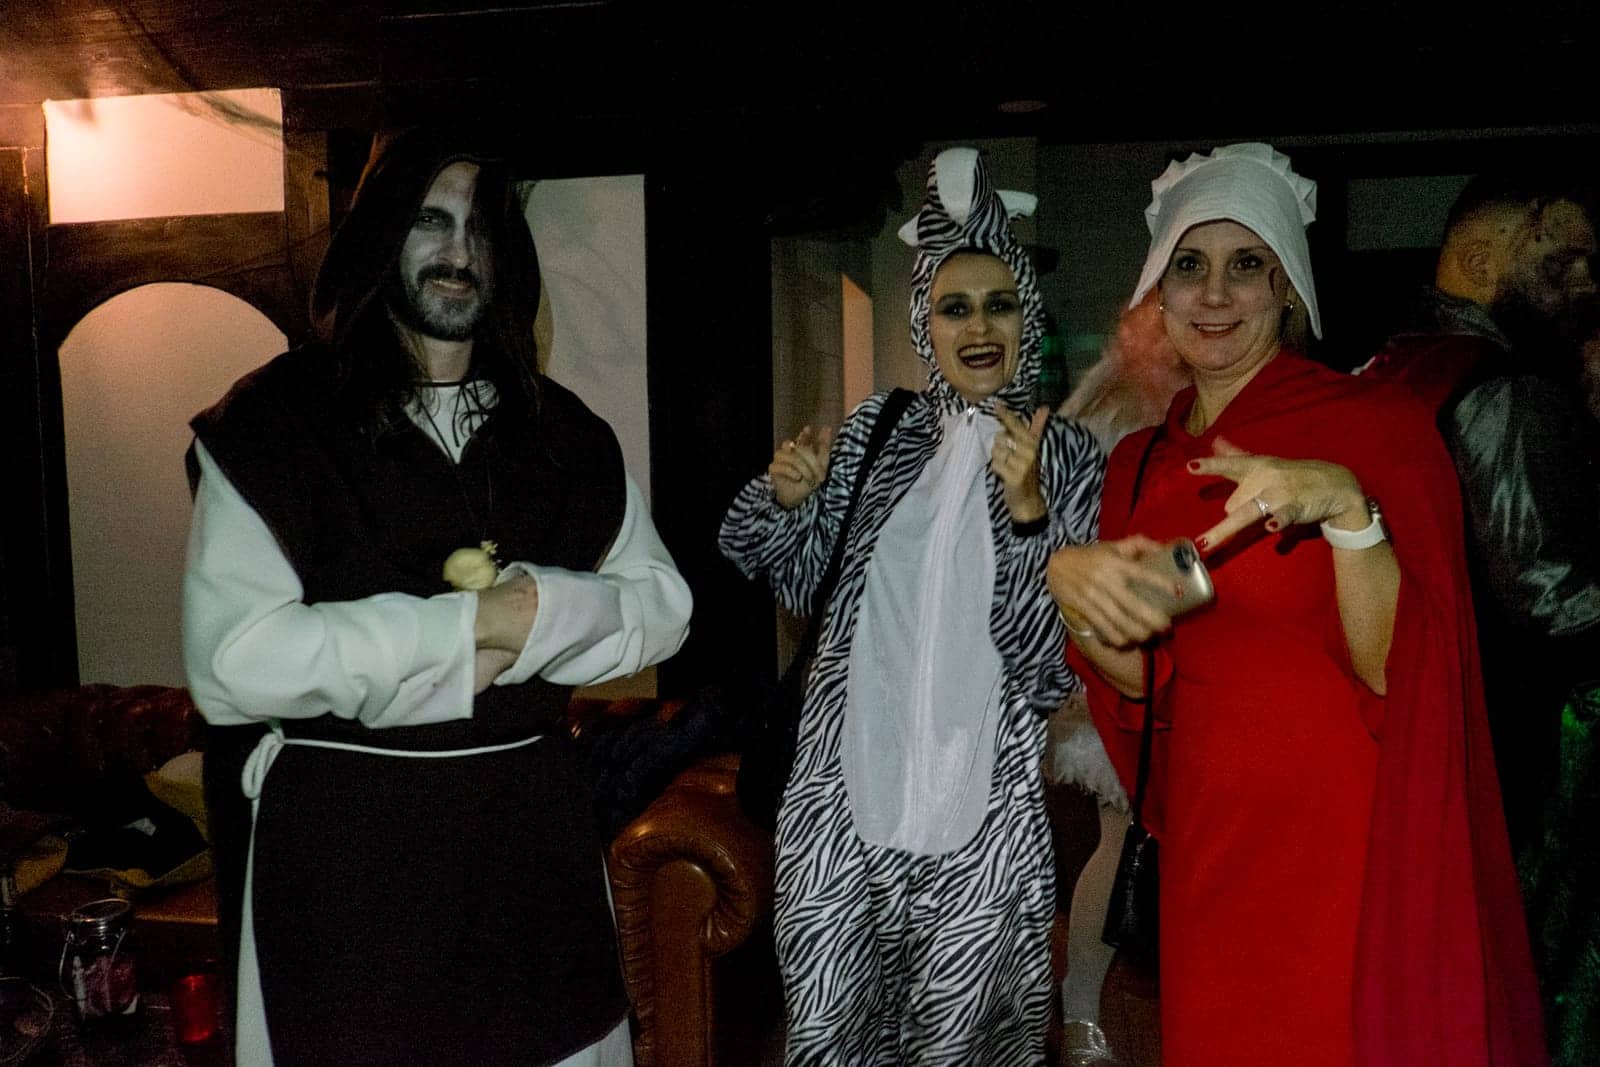 A man dressed as a monk, a women dressed as a zebra and another as a handmaid pose at a Halloween party in Bran Castle, Transylvania, Romania